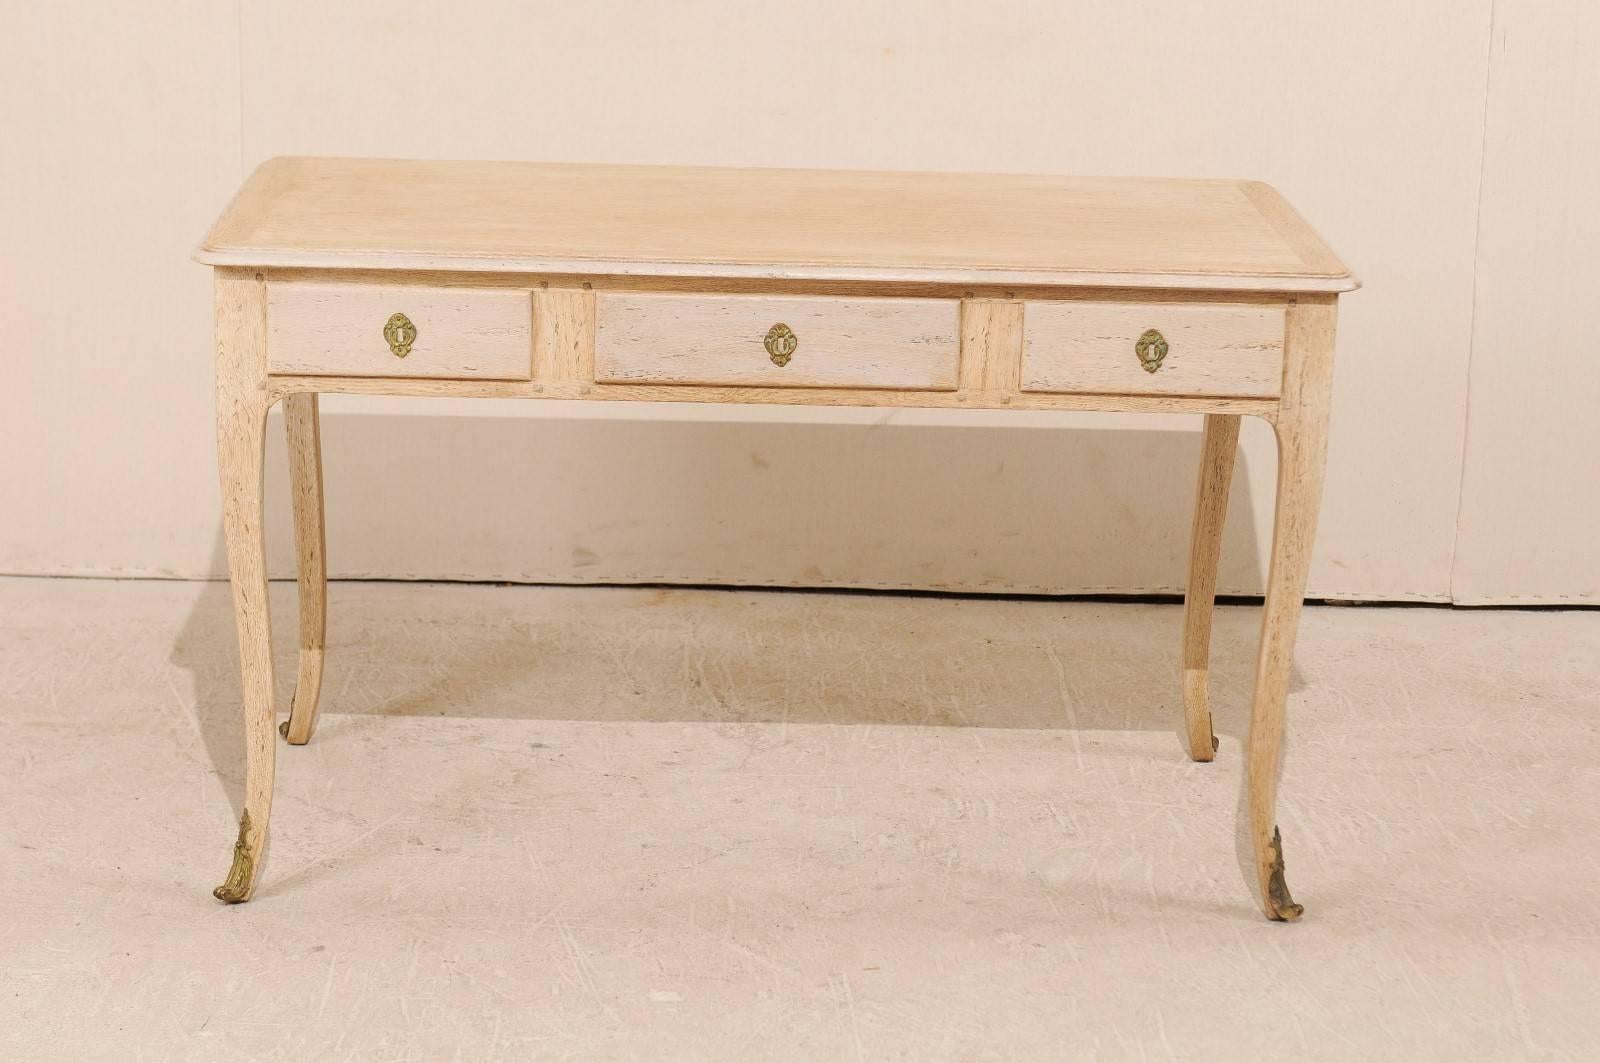 American Mid-Century Desk of Bleached Oak with Cabriole Legs and Brass Accents